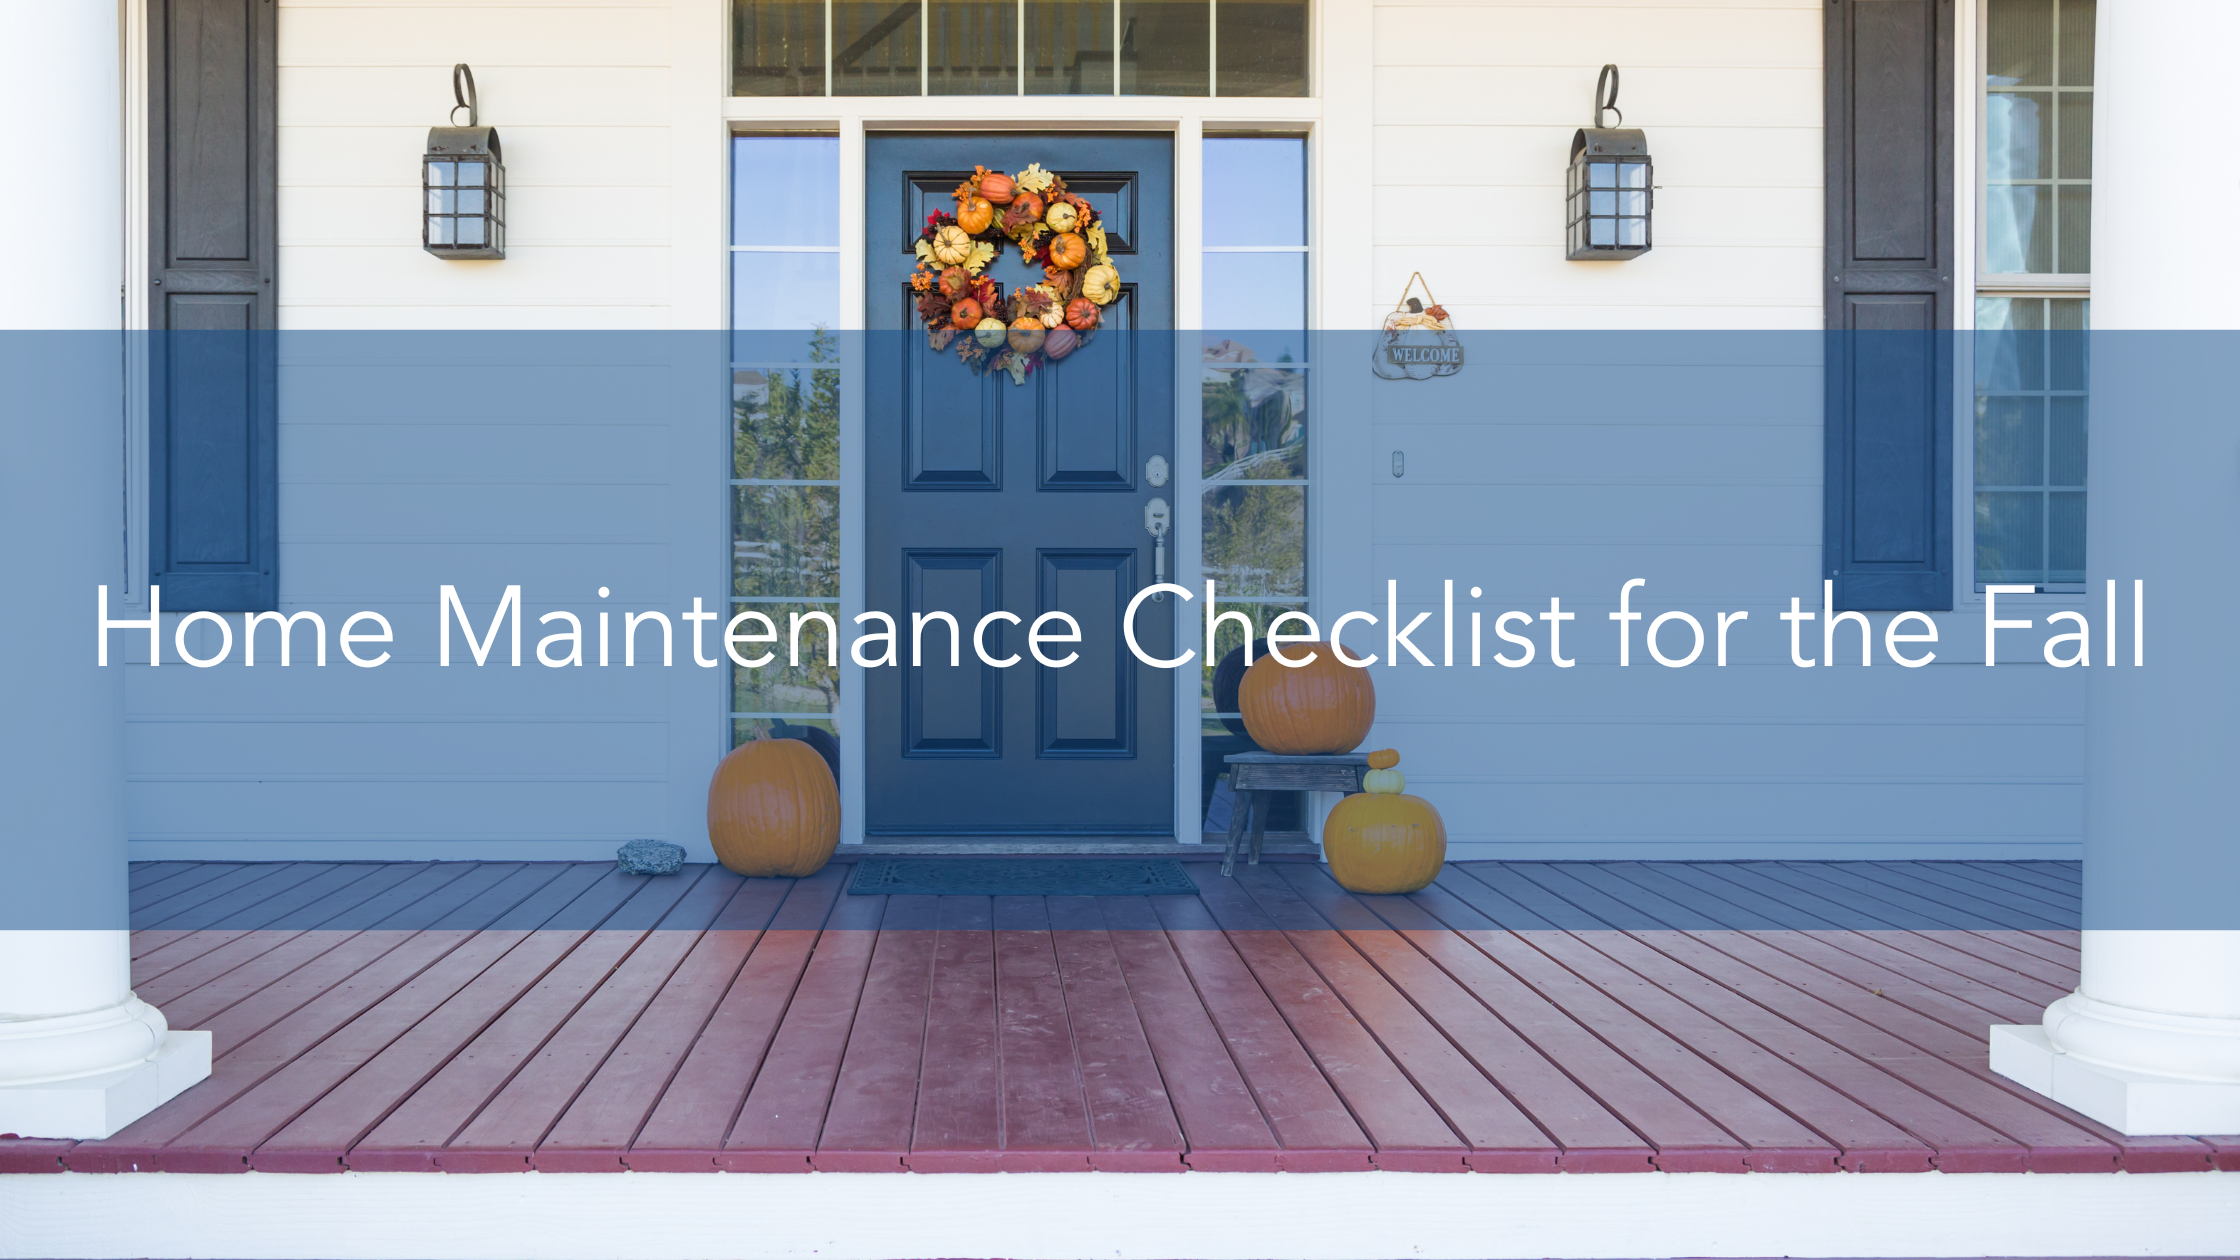 https://雷竞技下载链接官网appwww.explorizers.com/wp-content/uploads/2022/10/Home-Maintenance-Checklist-for-the-Fall.png